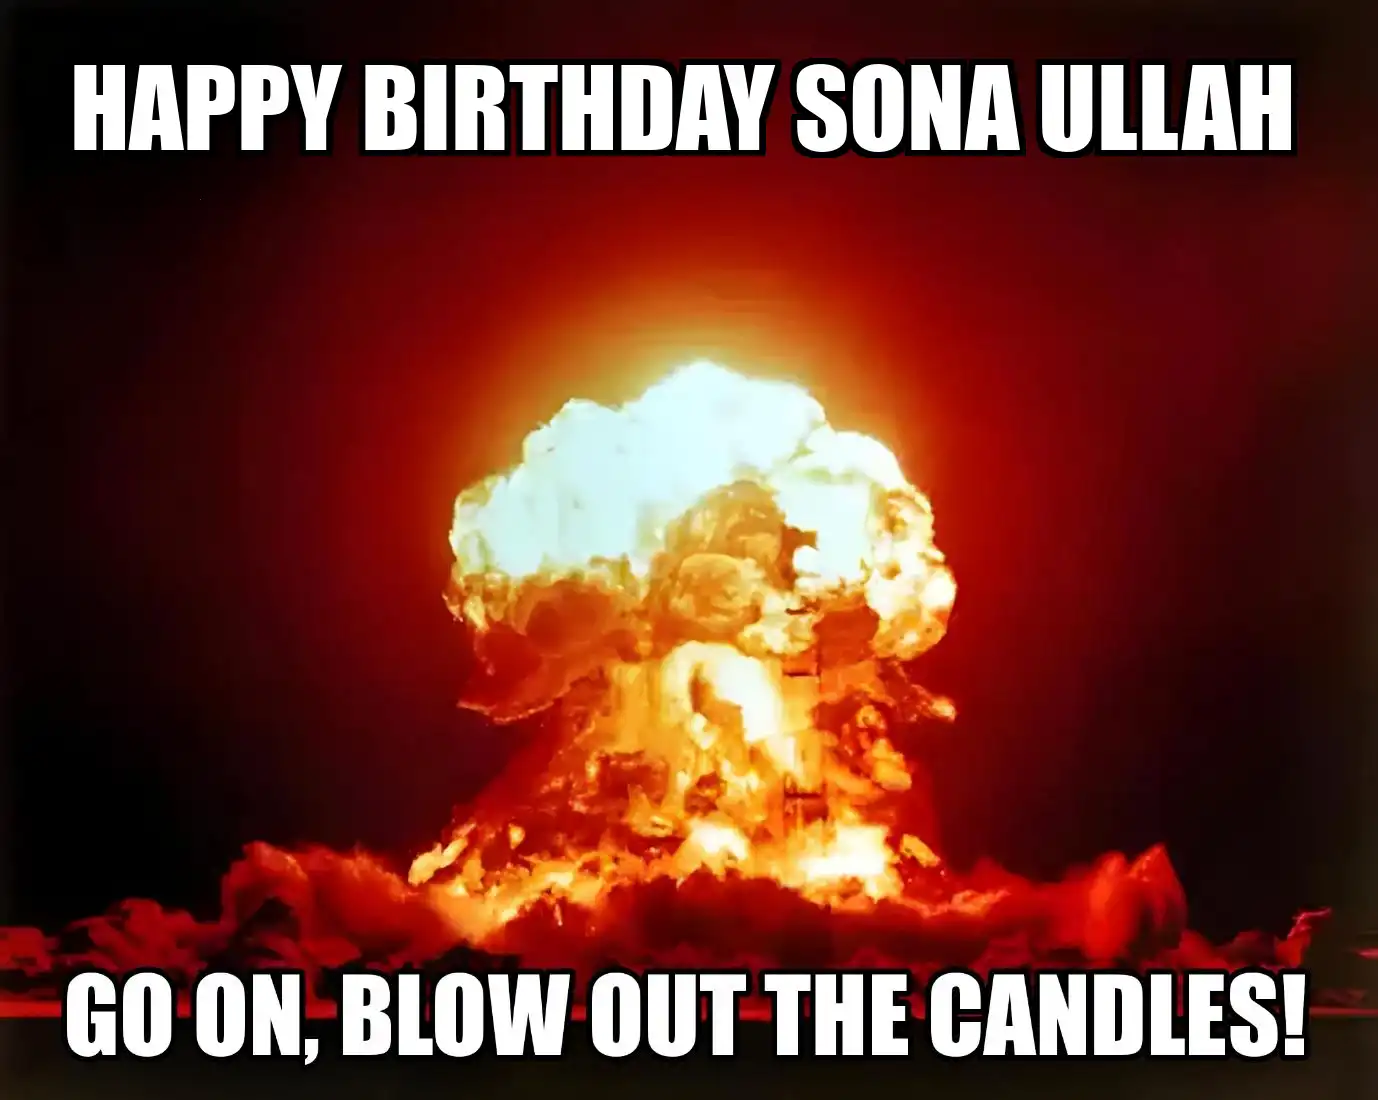 Happy Birthday Sona Ullah Go On Blow Out The Candles Meme